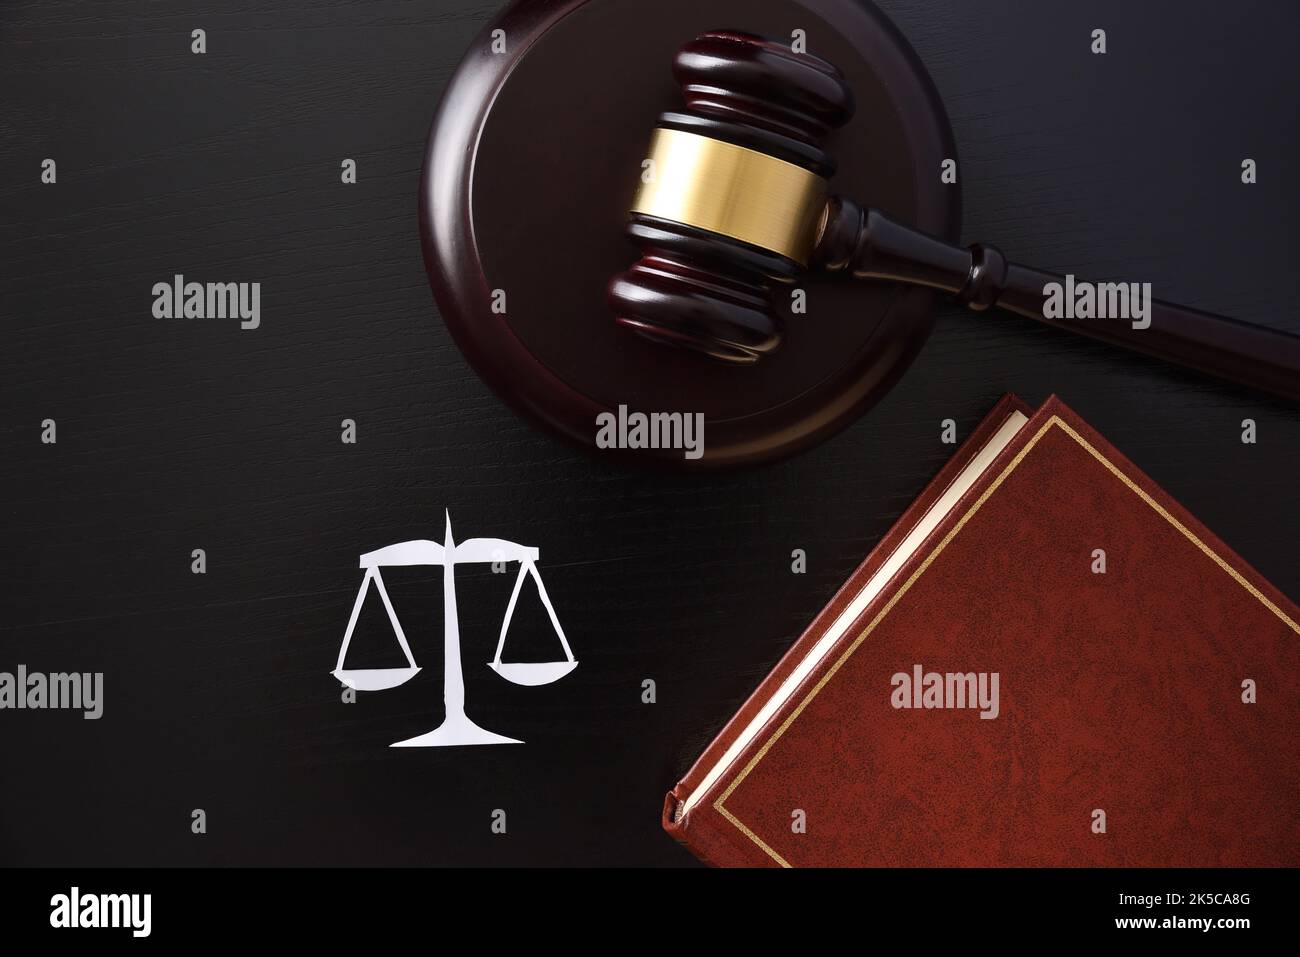 Objects symbols of justice such as scales mace and law book on black table. Top view Stock Photo